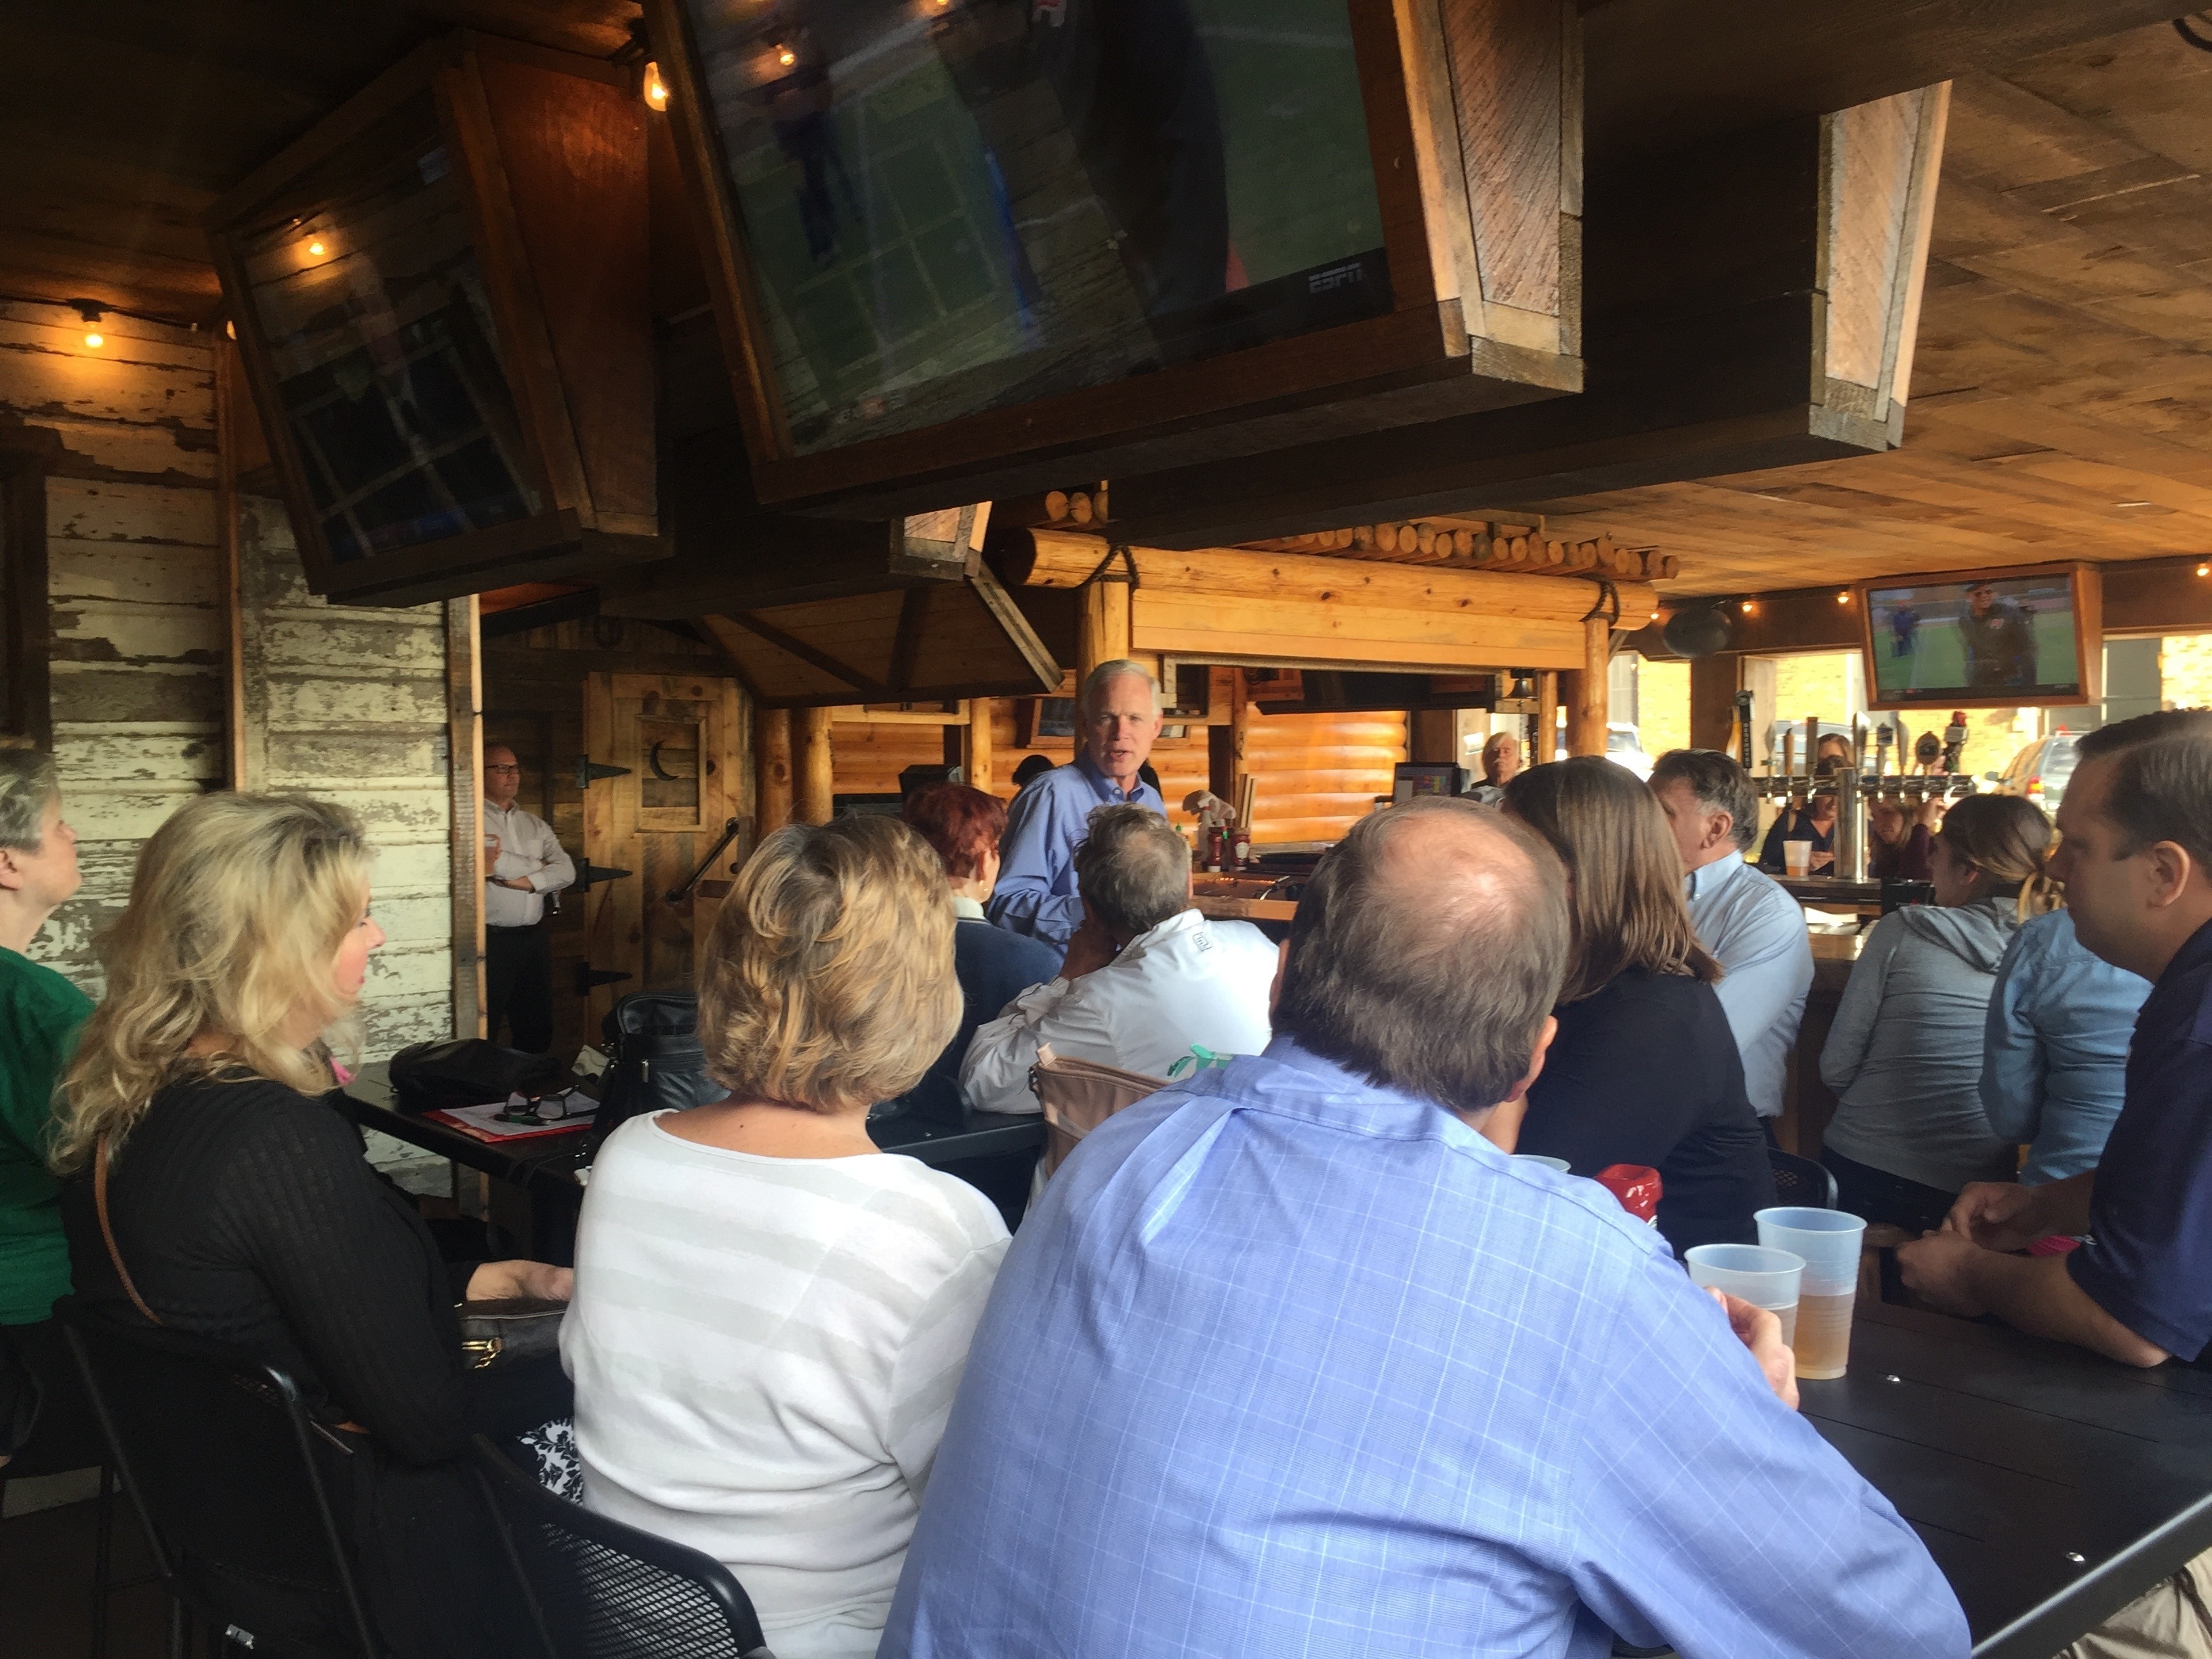 #RonOnTheRoad: Ron Johnson at the Smilin’ Moose in Hudson, WI